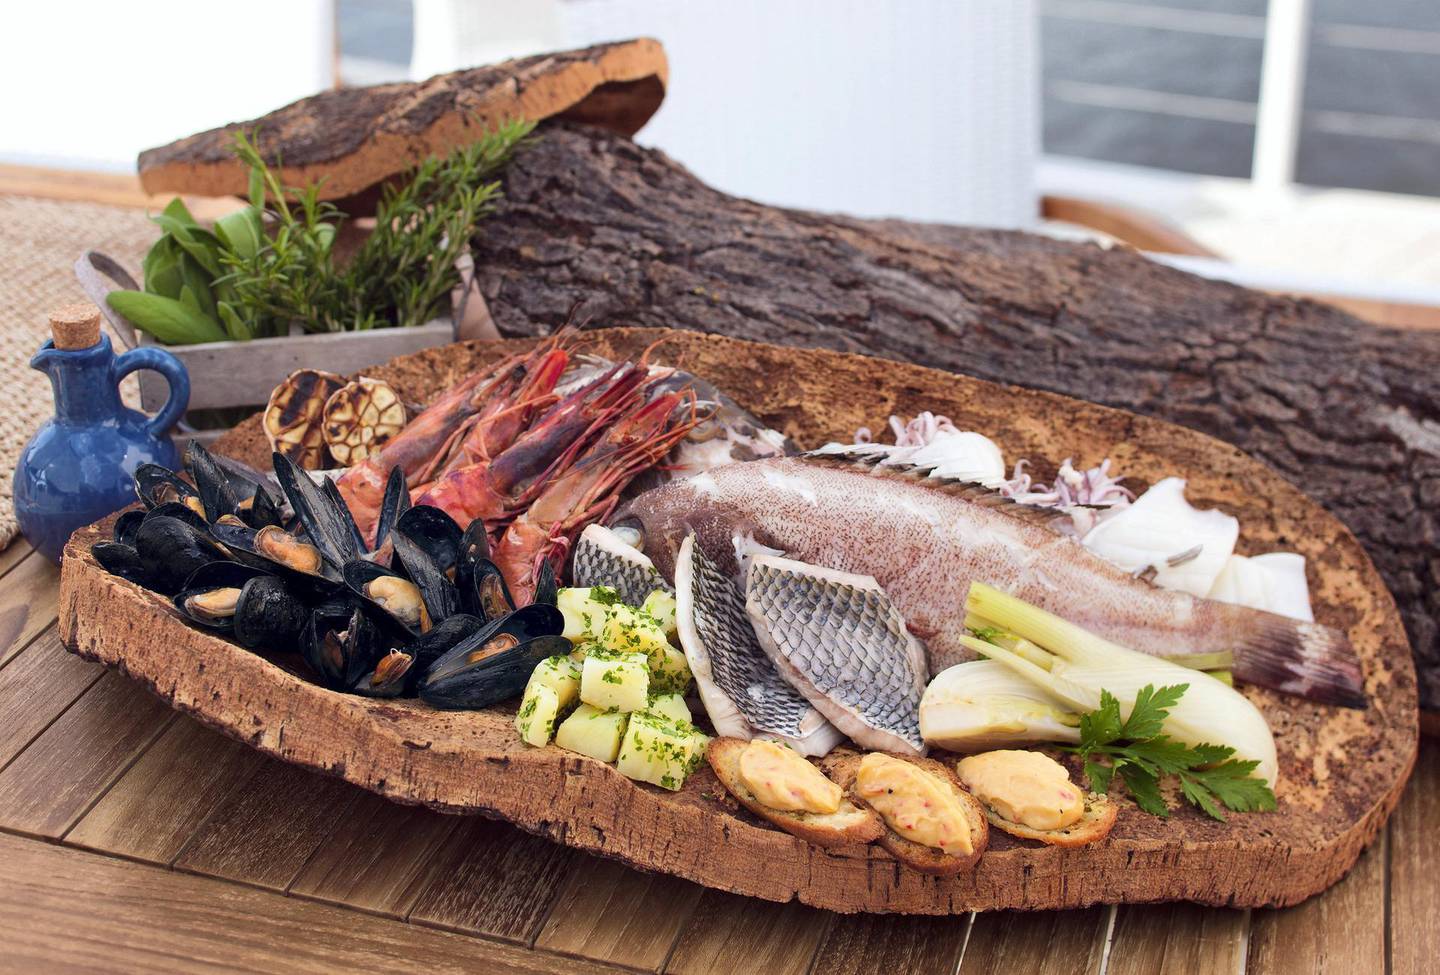 In keeping with changing customer demands, Boardwalk introduced seafood from sustainable sources to its menu.